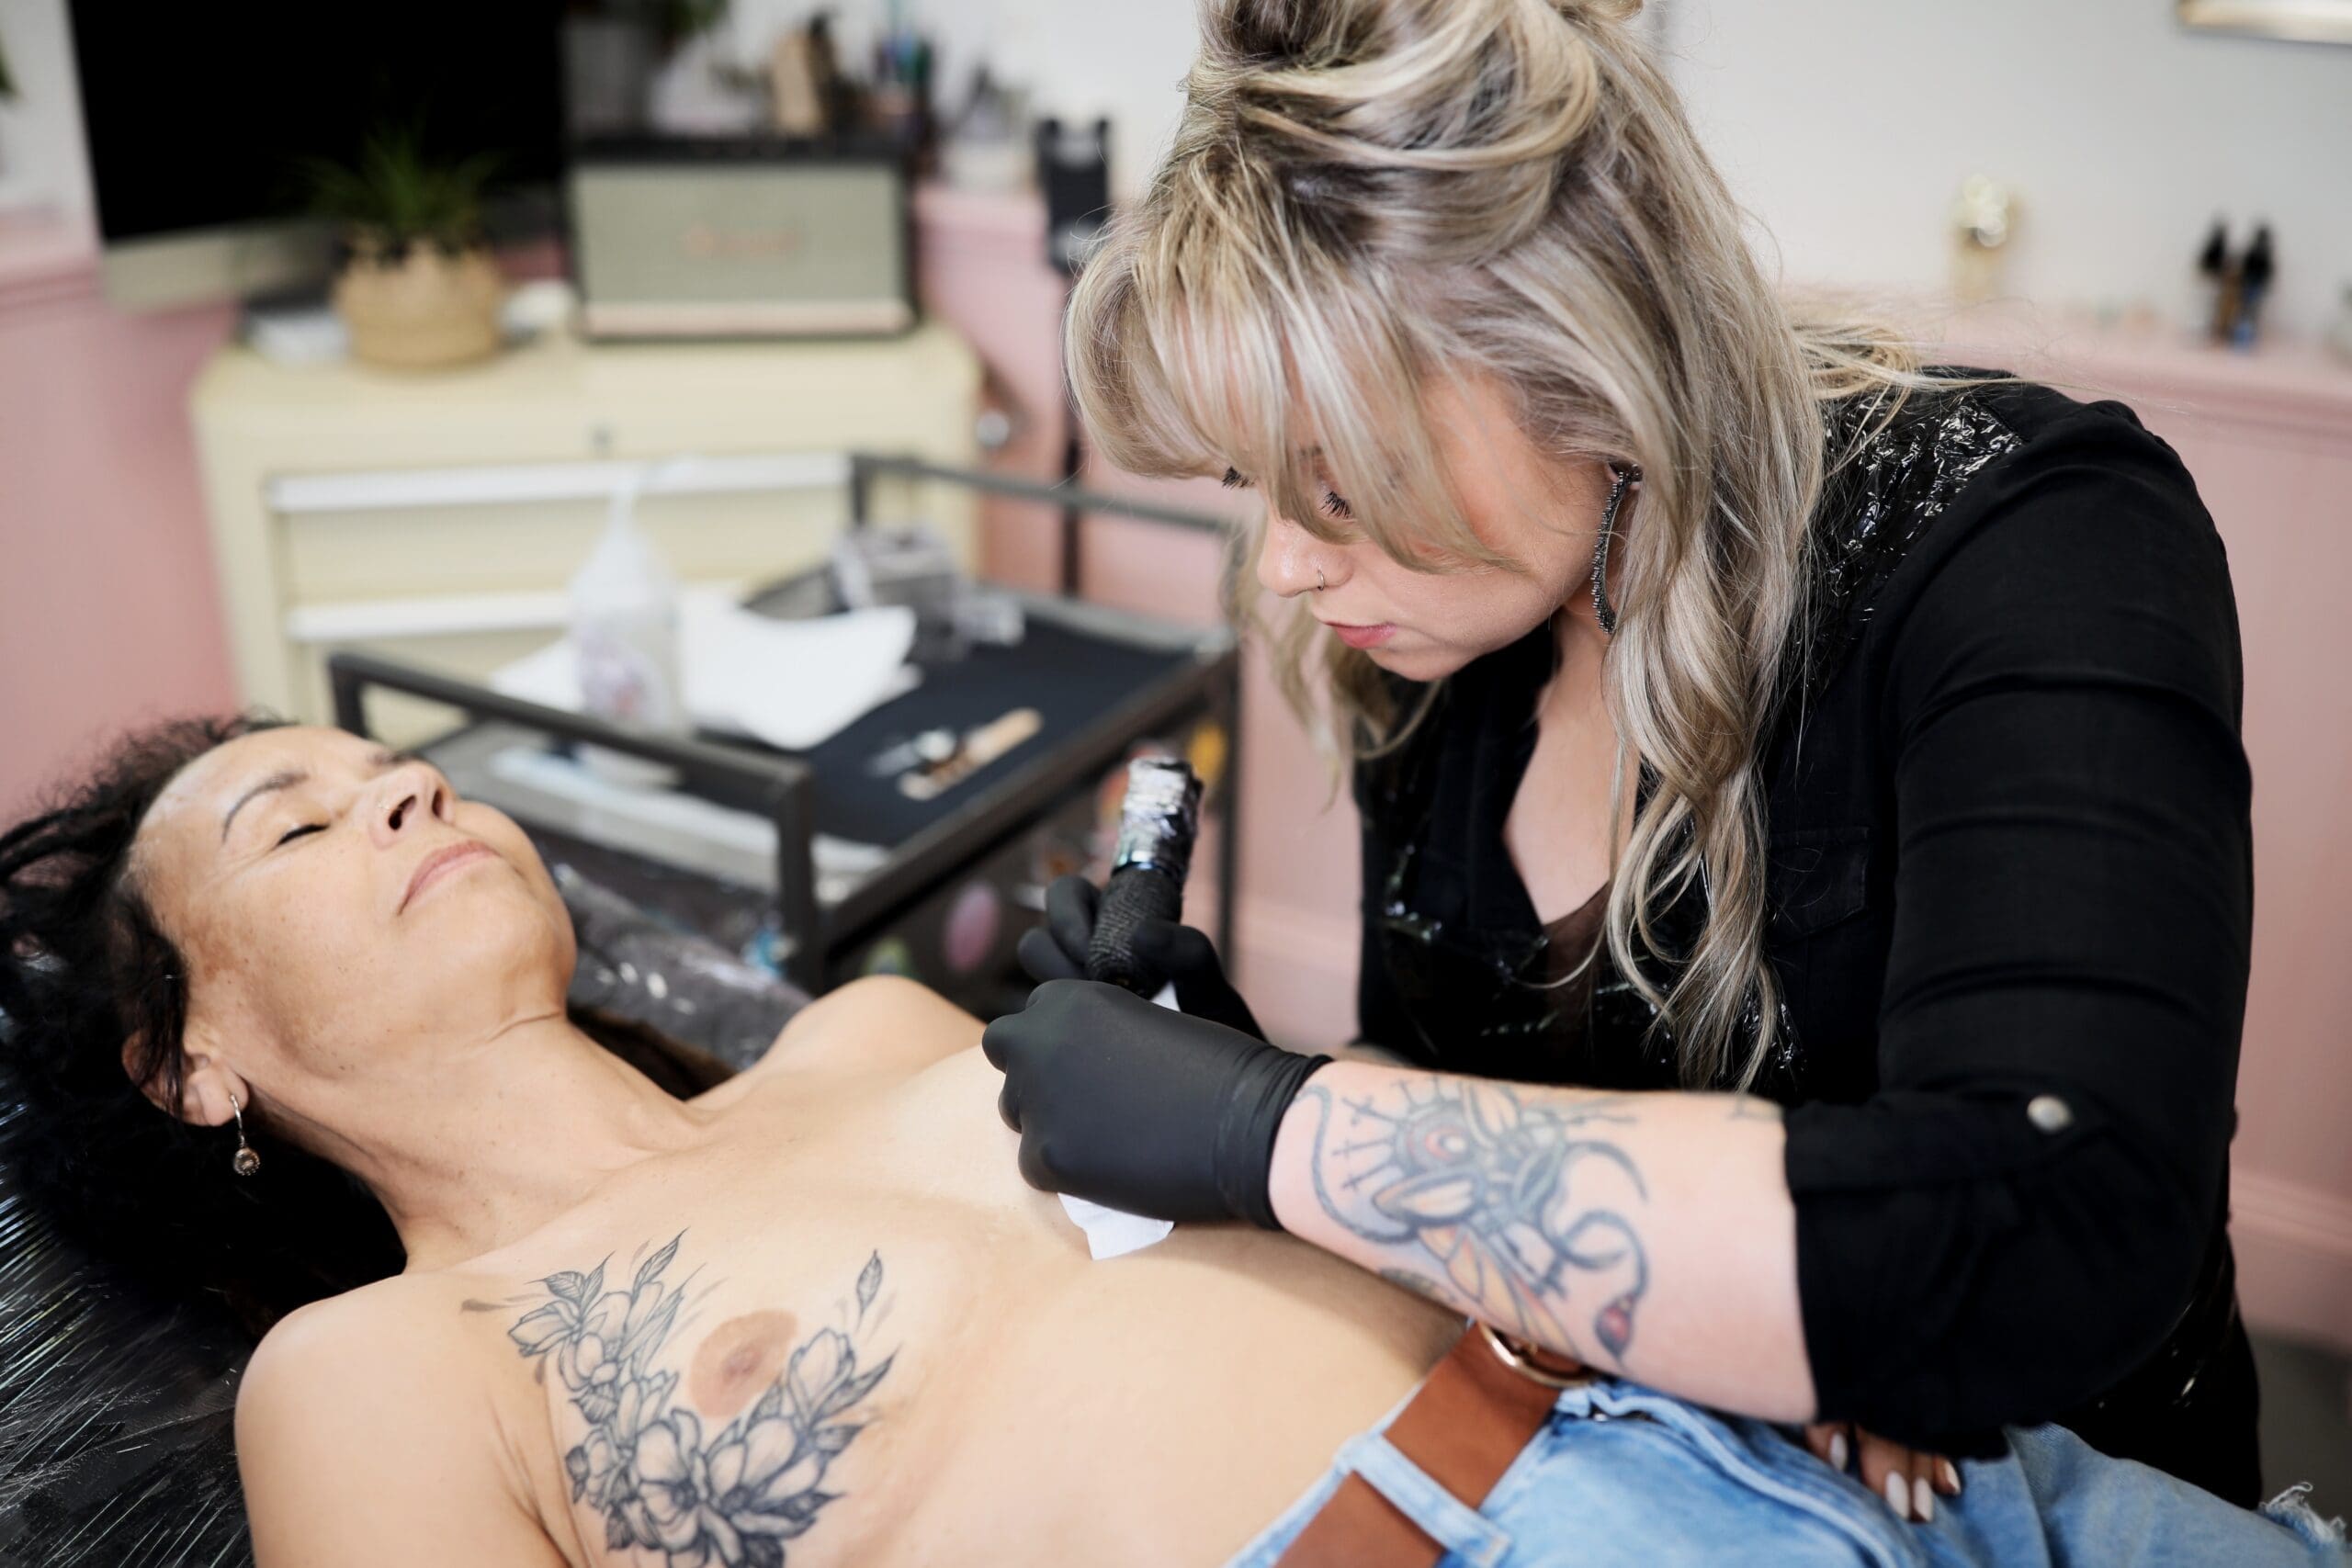 Breast Cancer Tattoos: Choosing a tattoo design after mastectomy surgery.